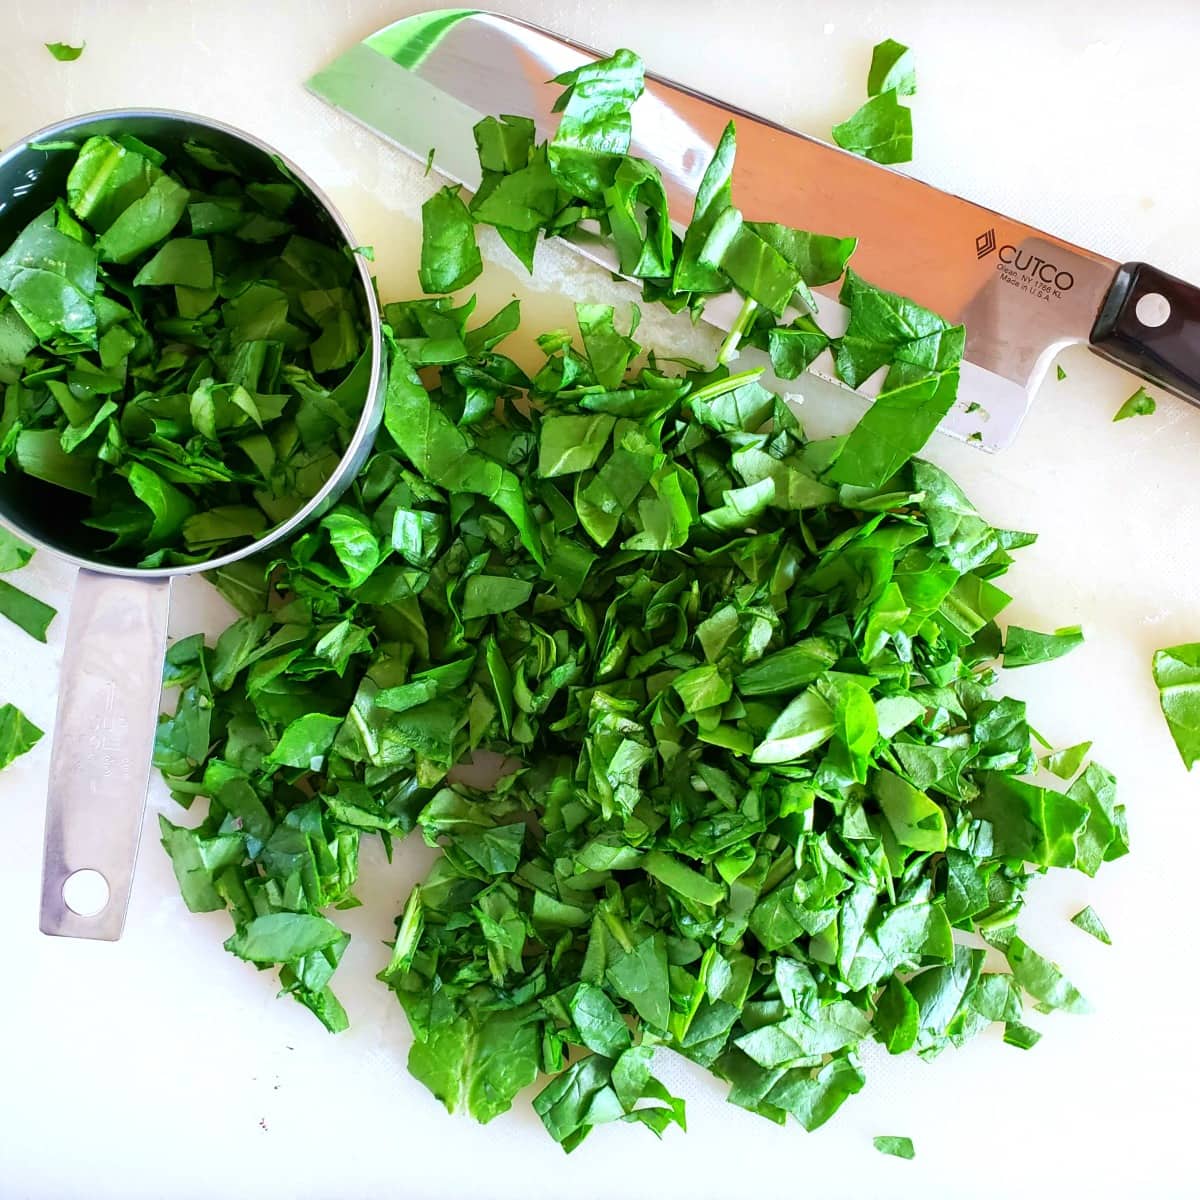 Chopping spinach on a white cutting board with a Cutco chef's knife